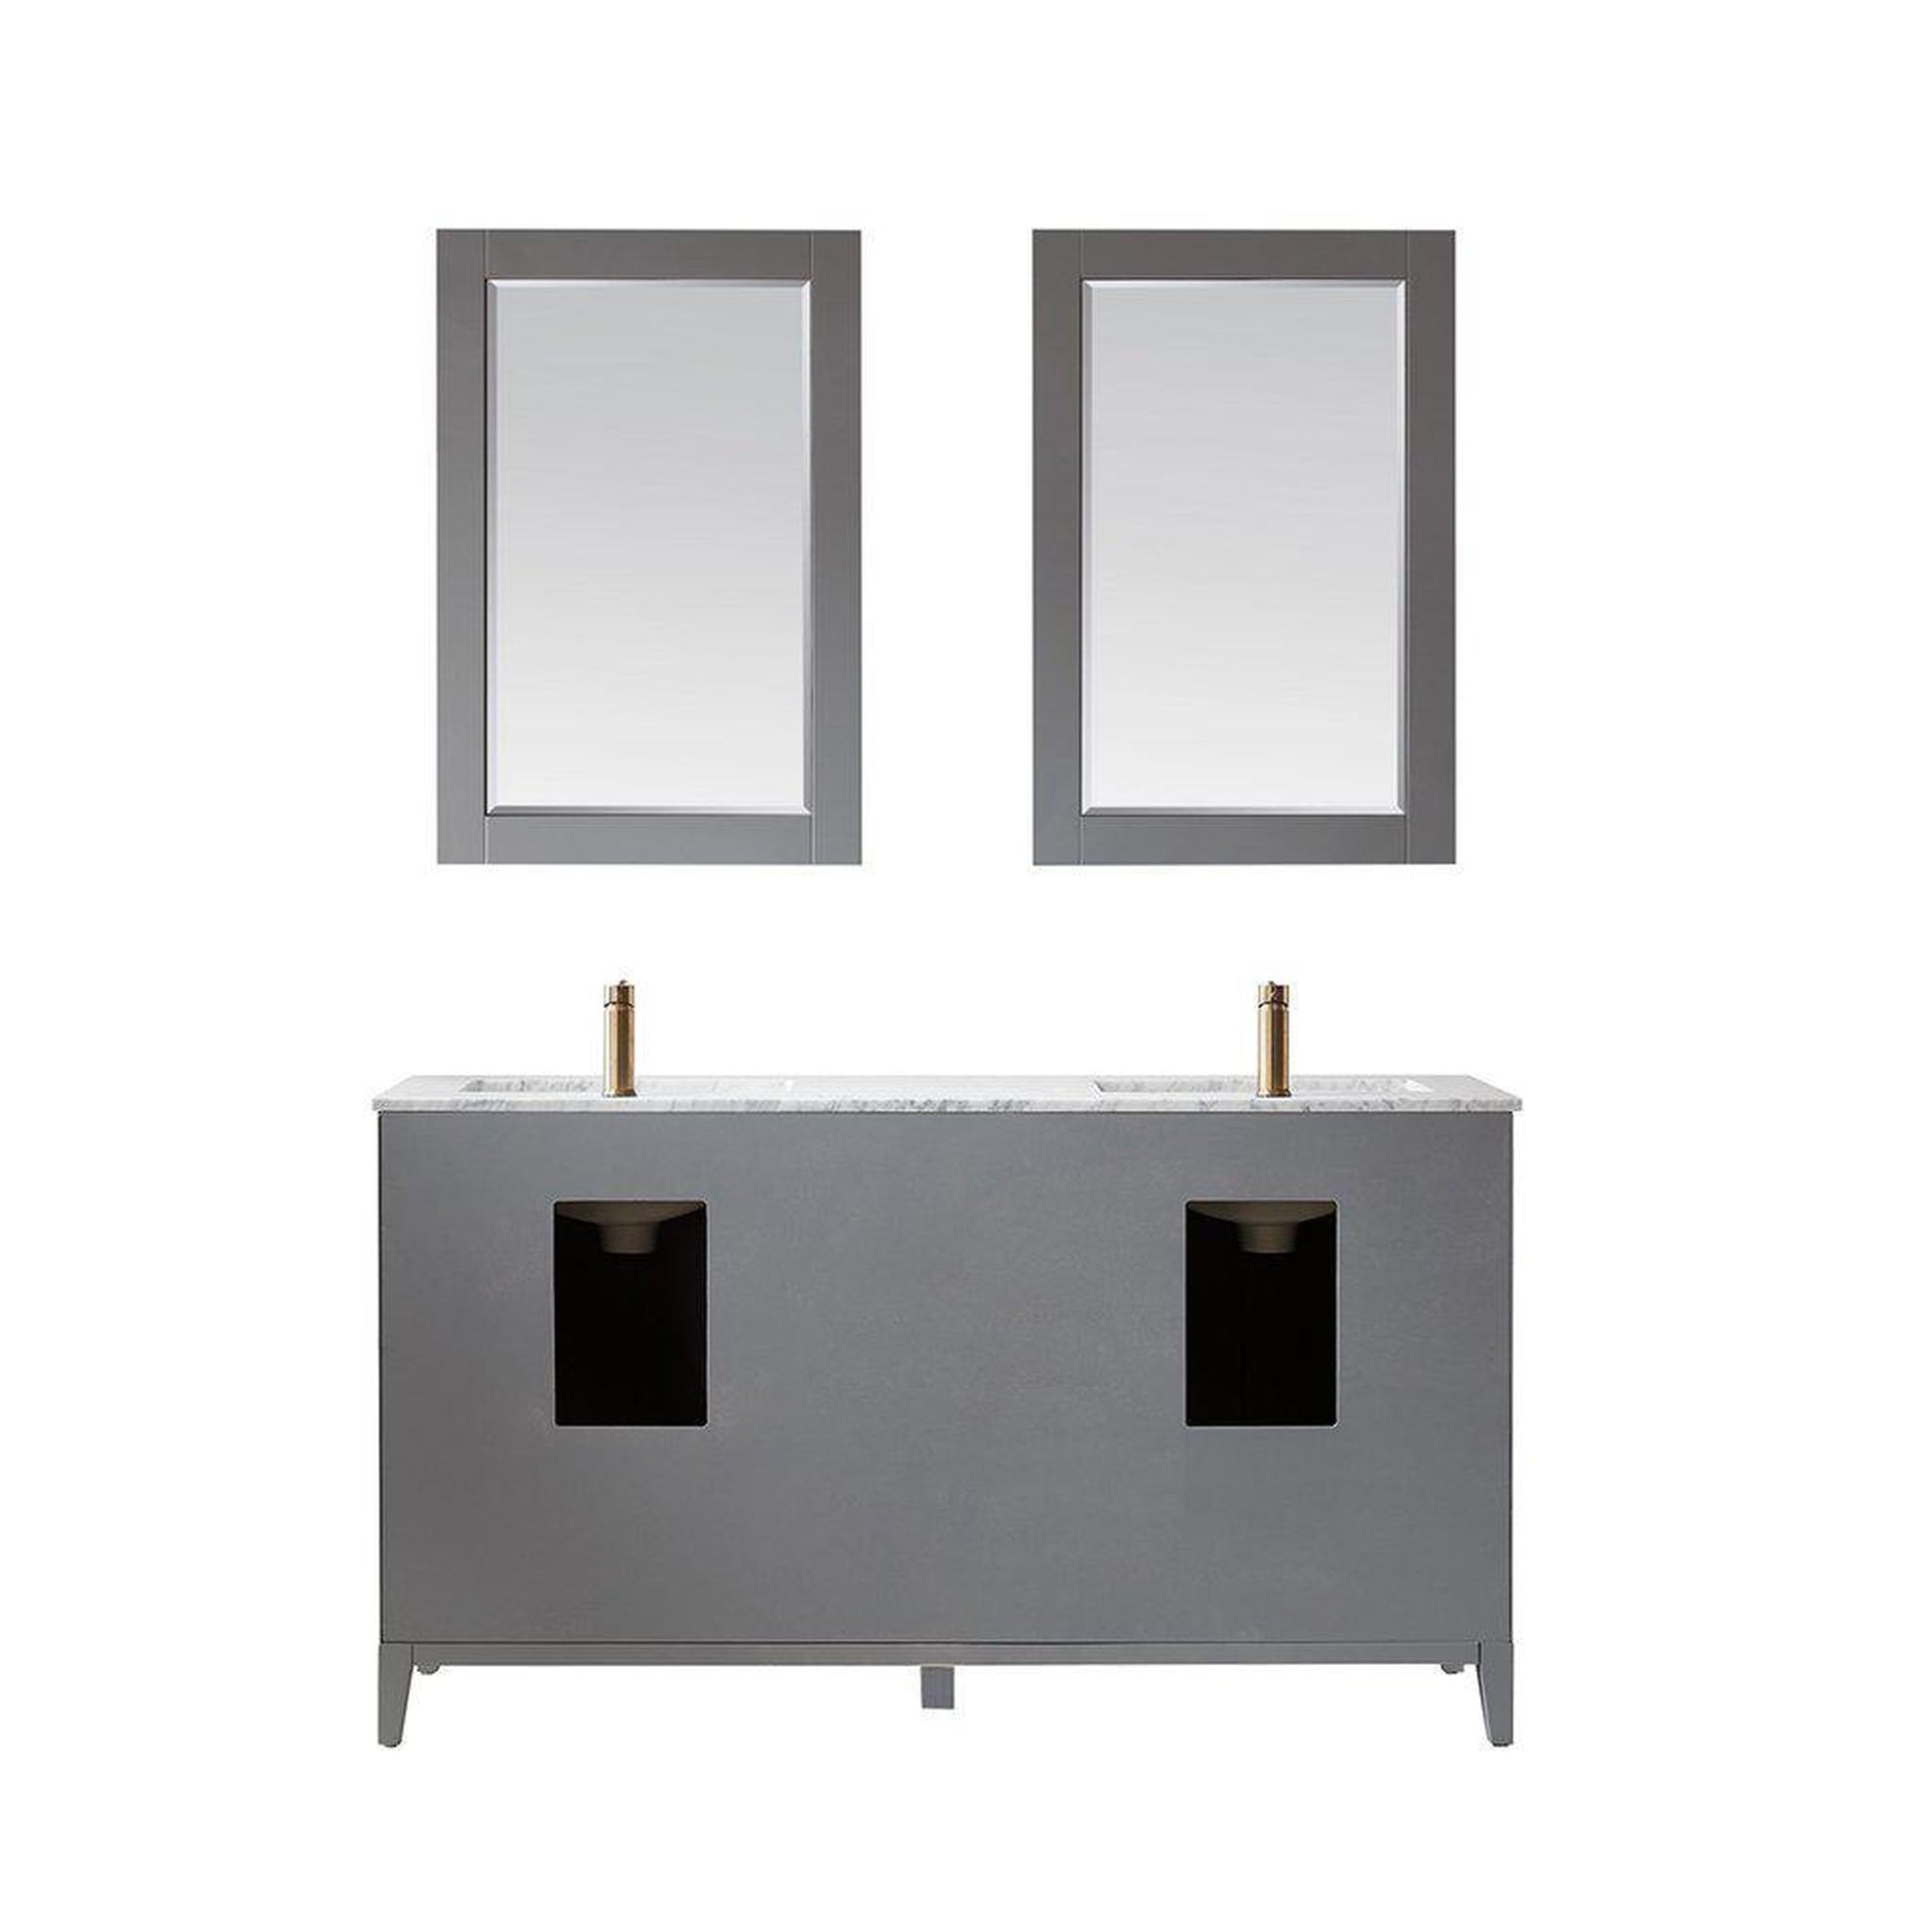 Altair Sutton 60" Double Gray Freestanding Bathroom Vanity Set With Mirror, Natural Carrara White Marble Two Rectangular Undermount Ceramic Sinks, and Overflow